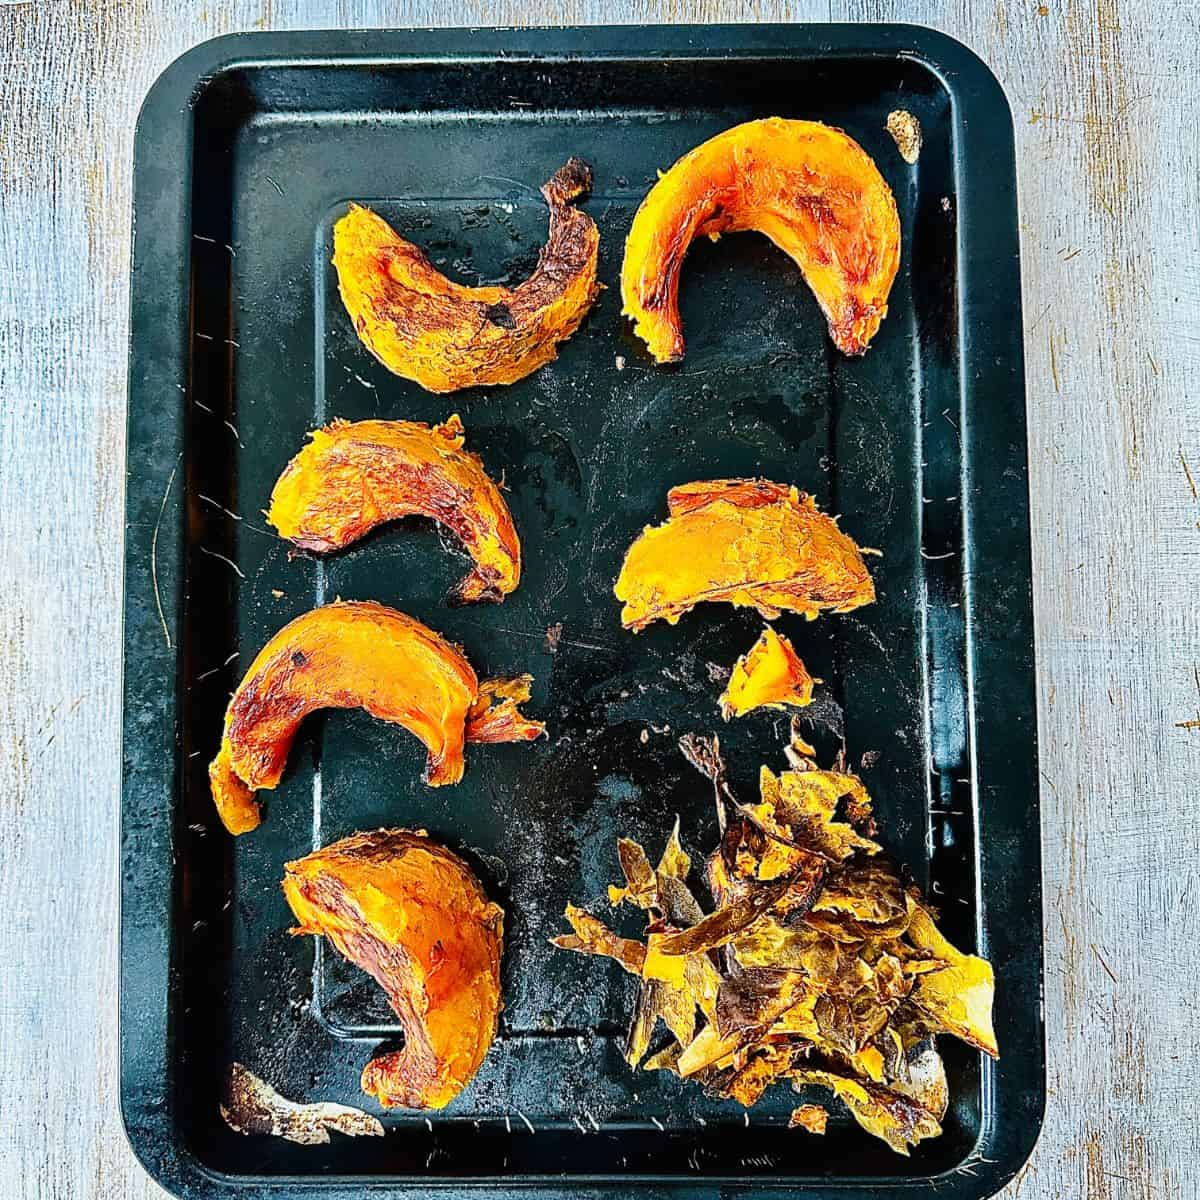 A baking tray containing roasted pumpkin wedges with skin removed. The skin is piled in one corner of the baking tray.